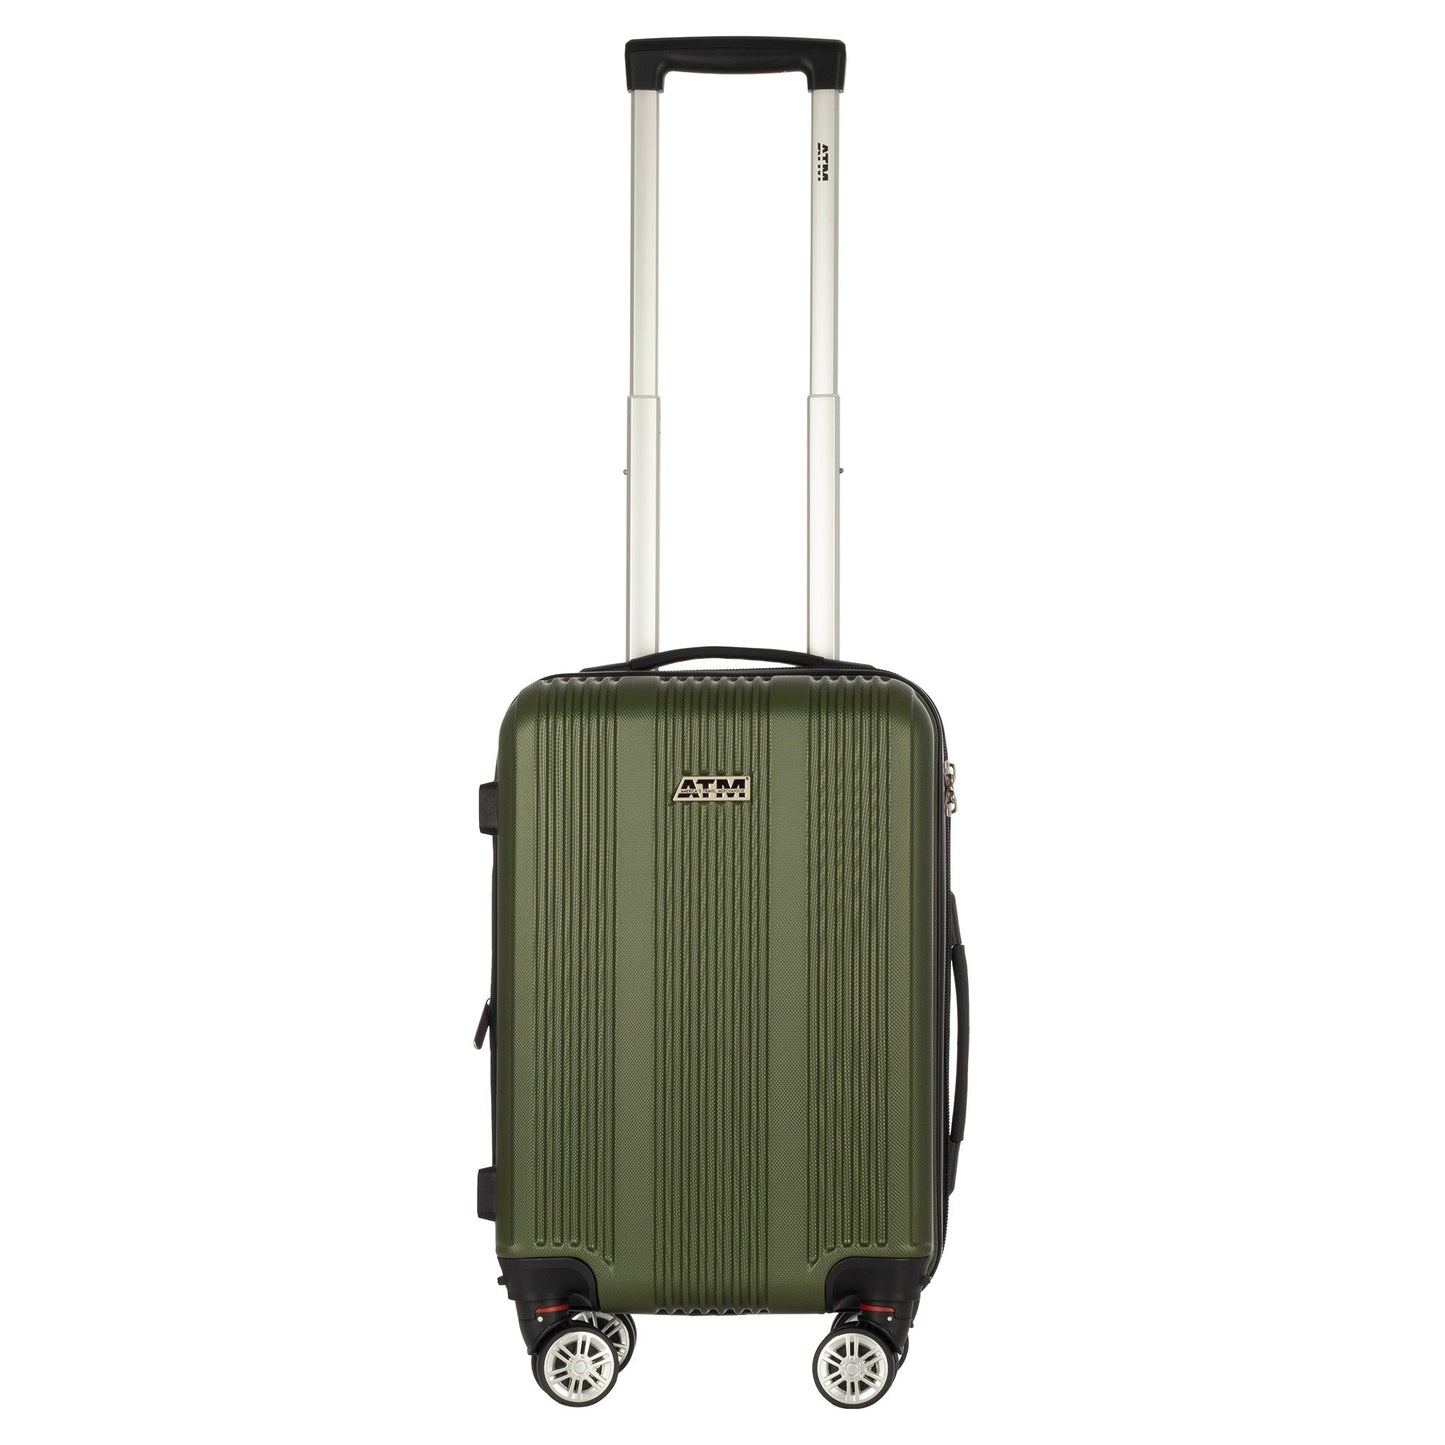 Tactic Collection Green For Airplane Cabin Luggage 4 Piece Set (18/19/20/21")